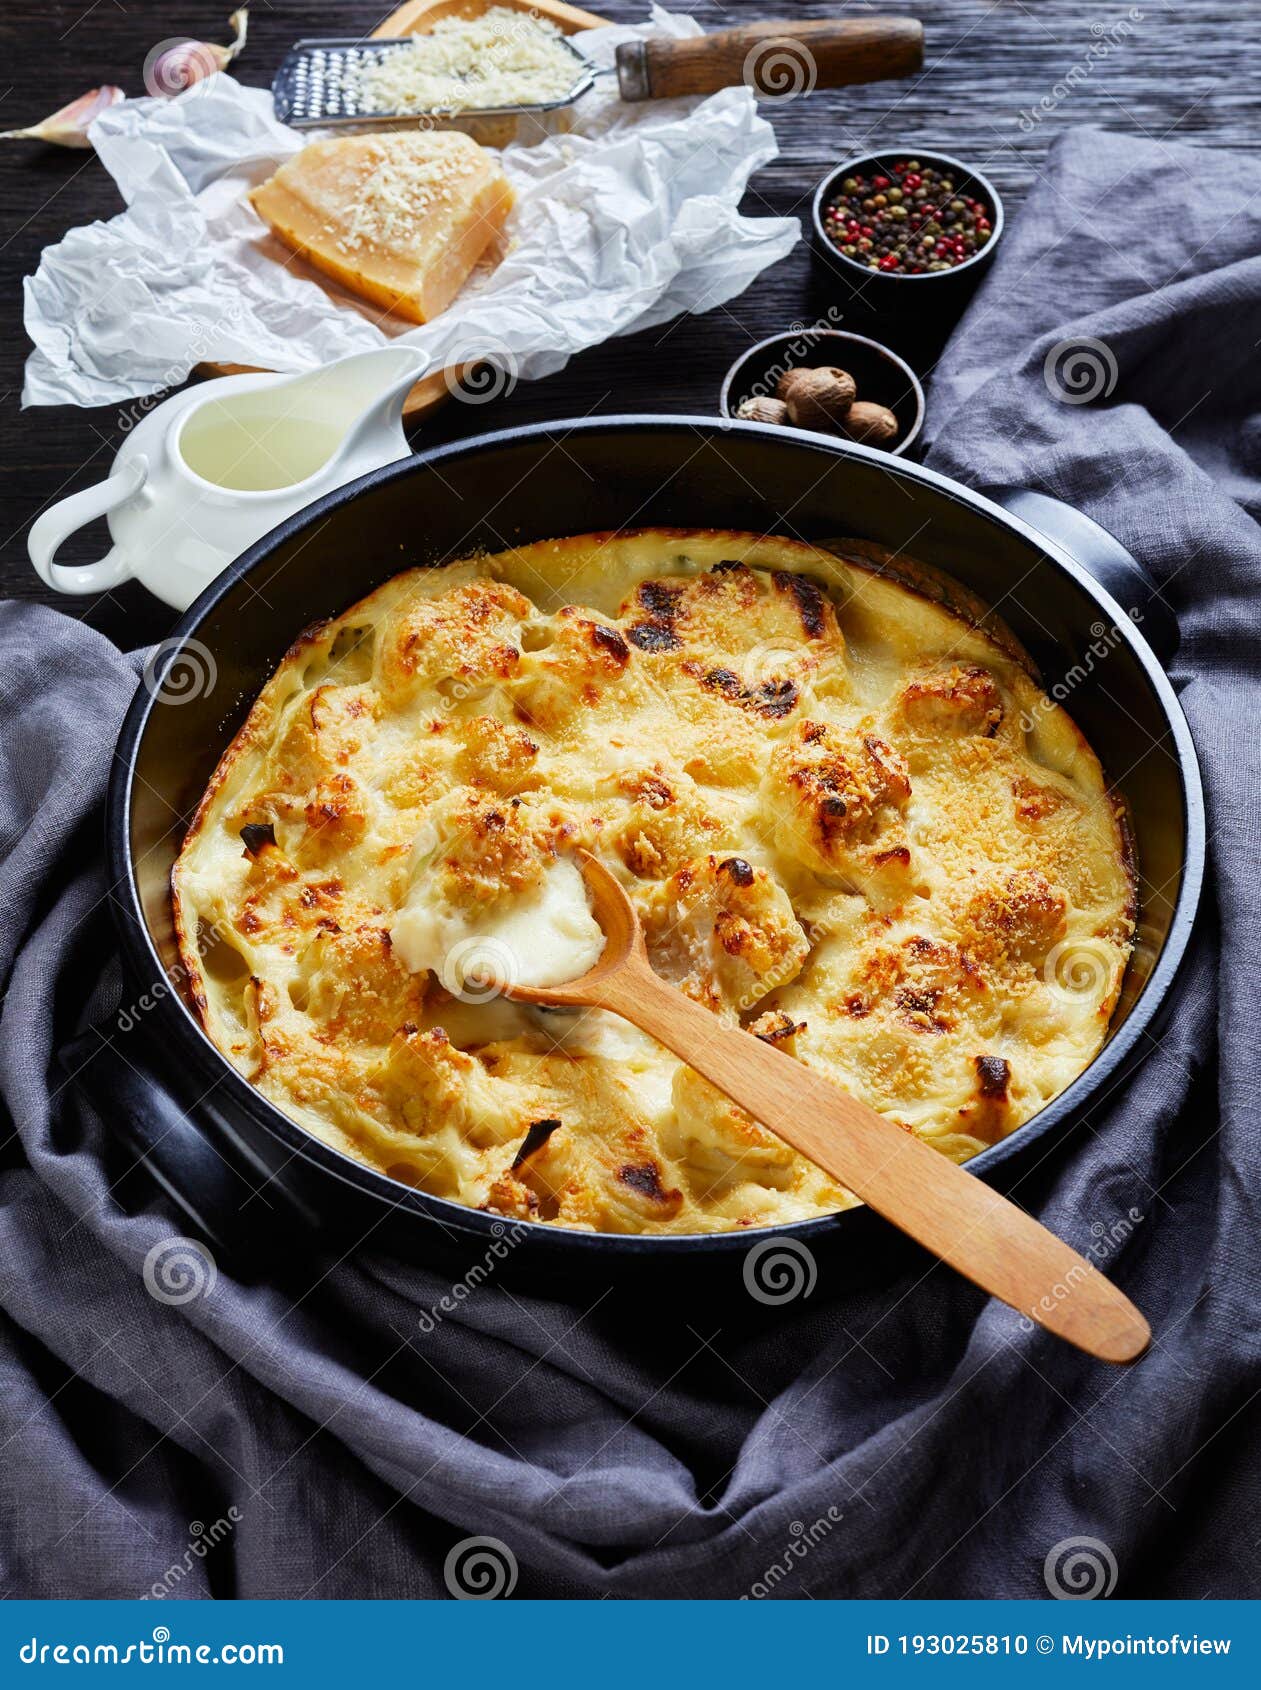 Cauliflower cheese casserole on a black dish. Cauliflower cheese casserole- vegetable side dish served on a black baking dish on wooden background with ingredients: garlic, nutmeg, peppercorns, milk, parmesan cheese, close-up